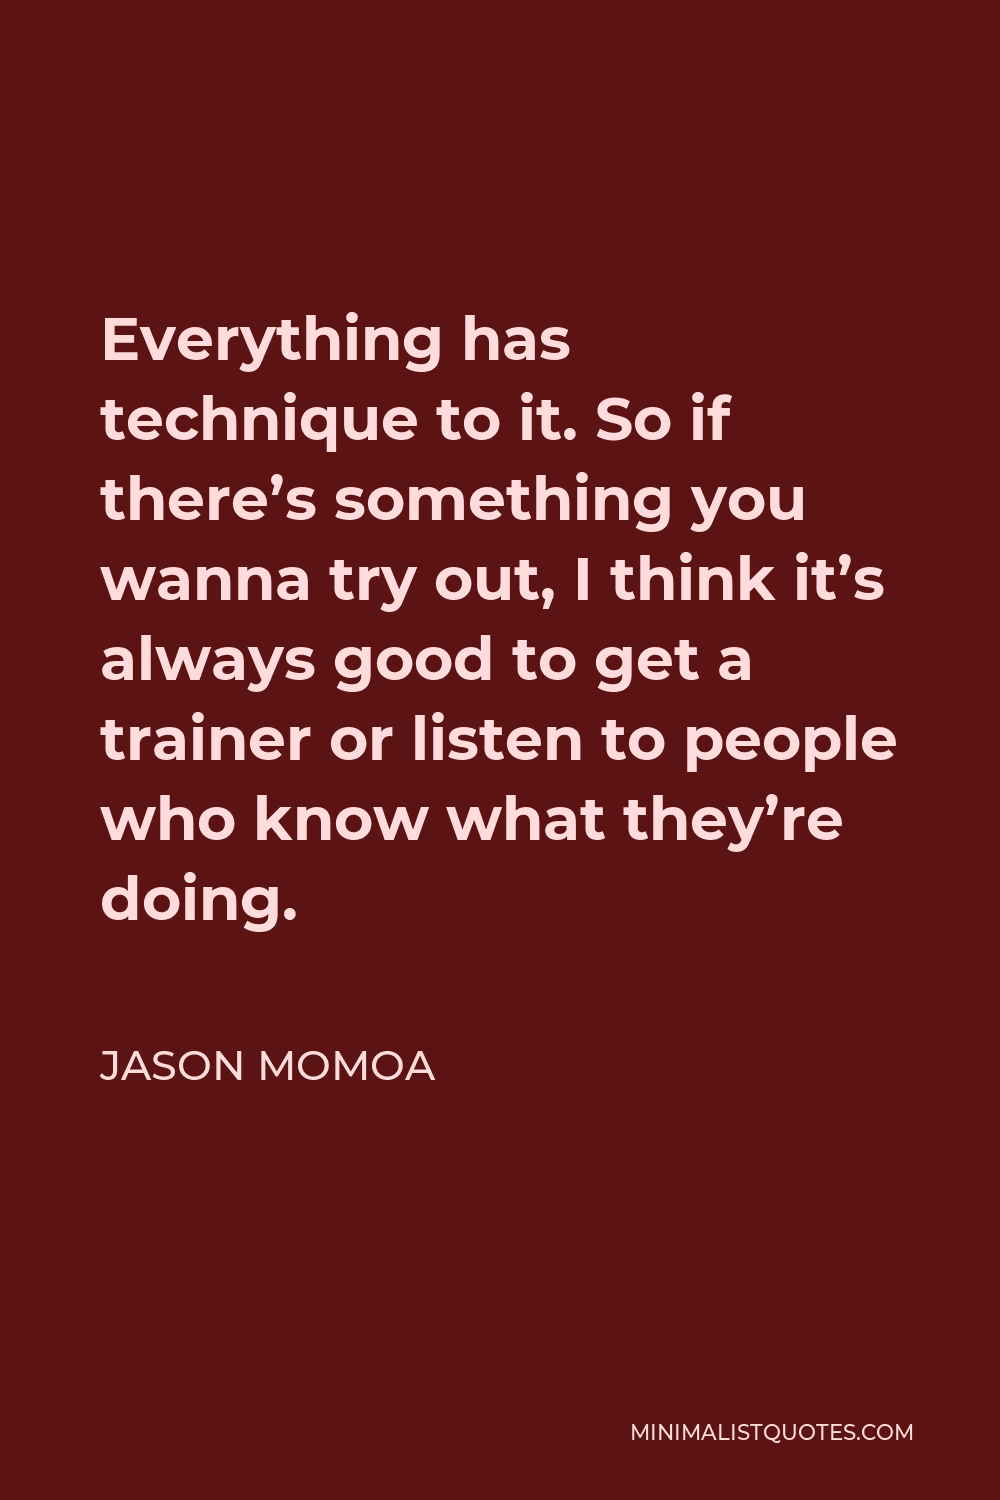 Jason Momoa Quote - Everything has technique to it. So if there’s something you wanna try out, I think it’s always good to get a trainer or listen to people who know what they’re doing.